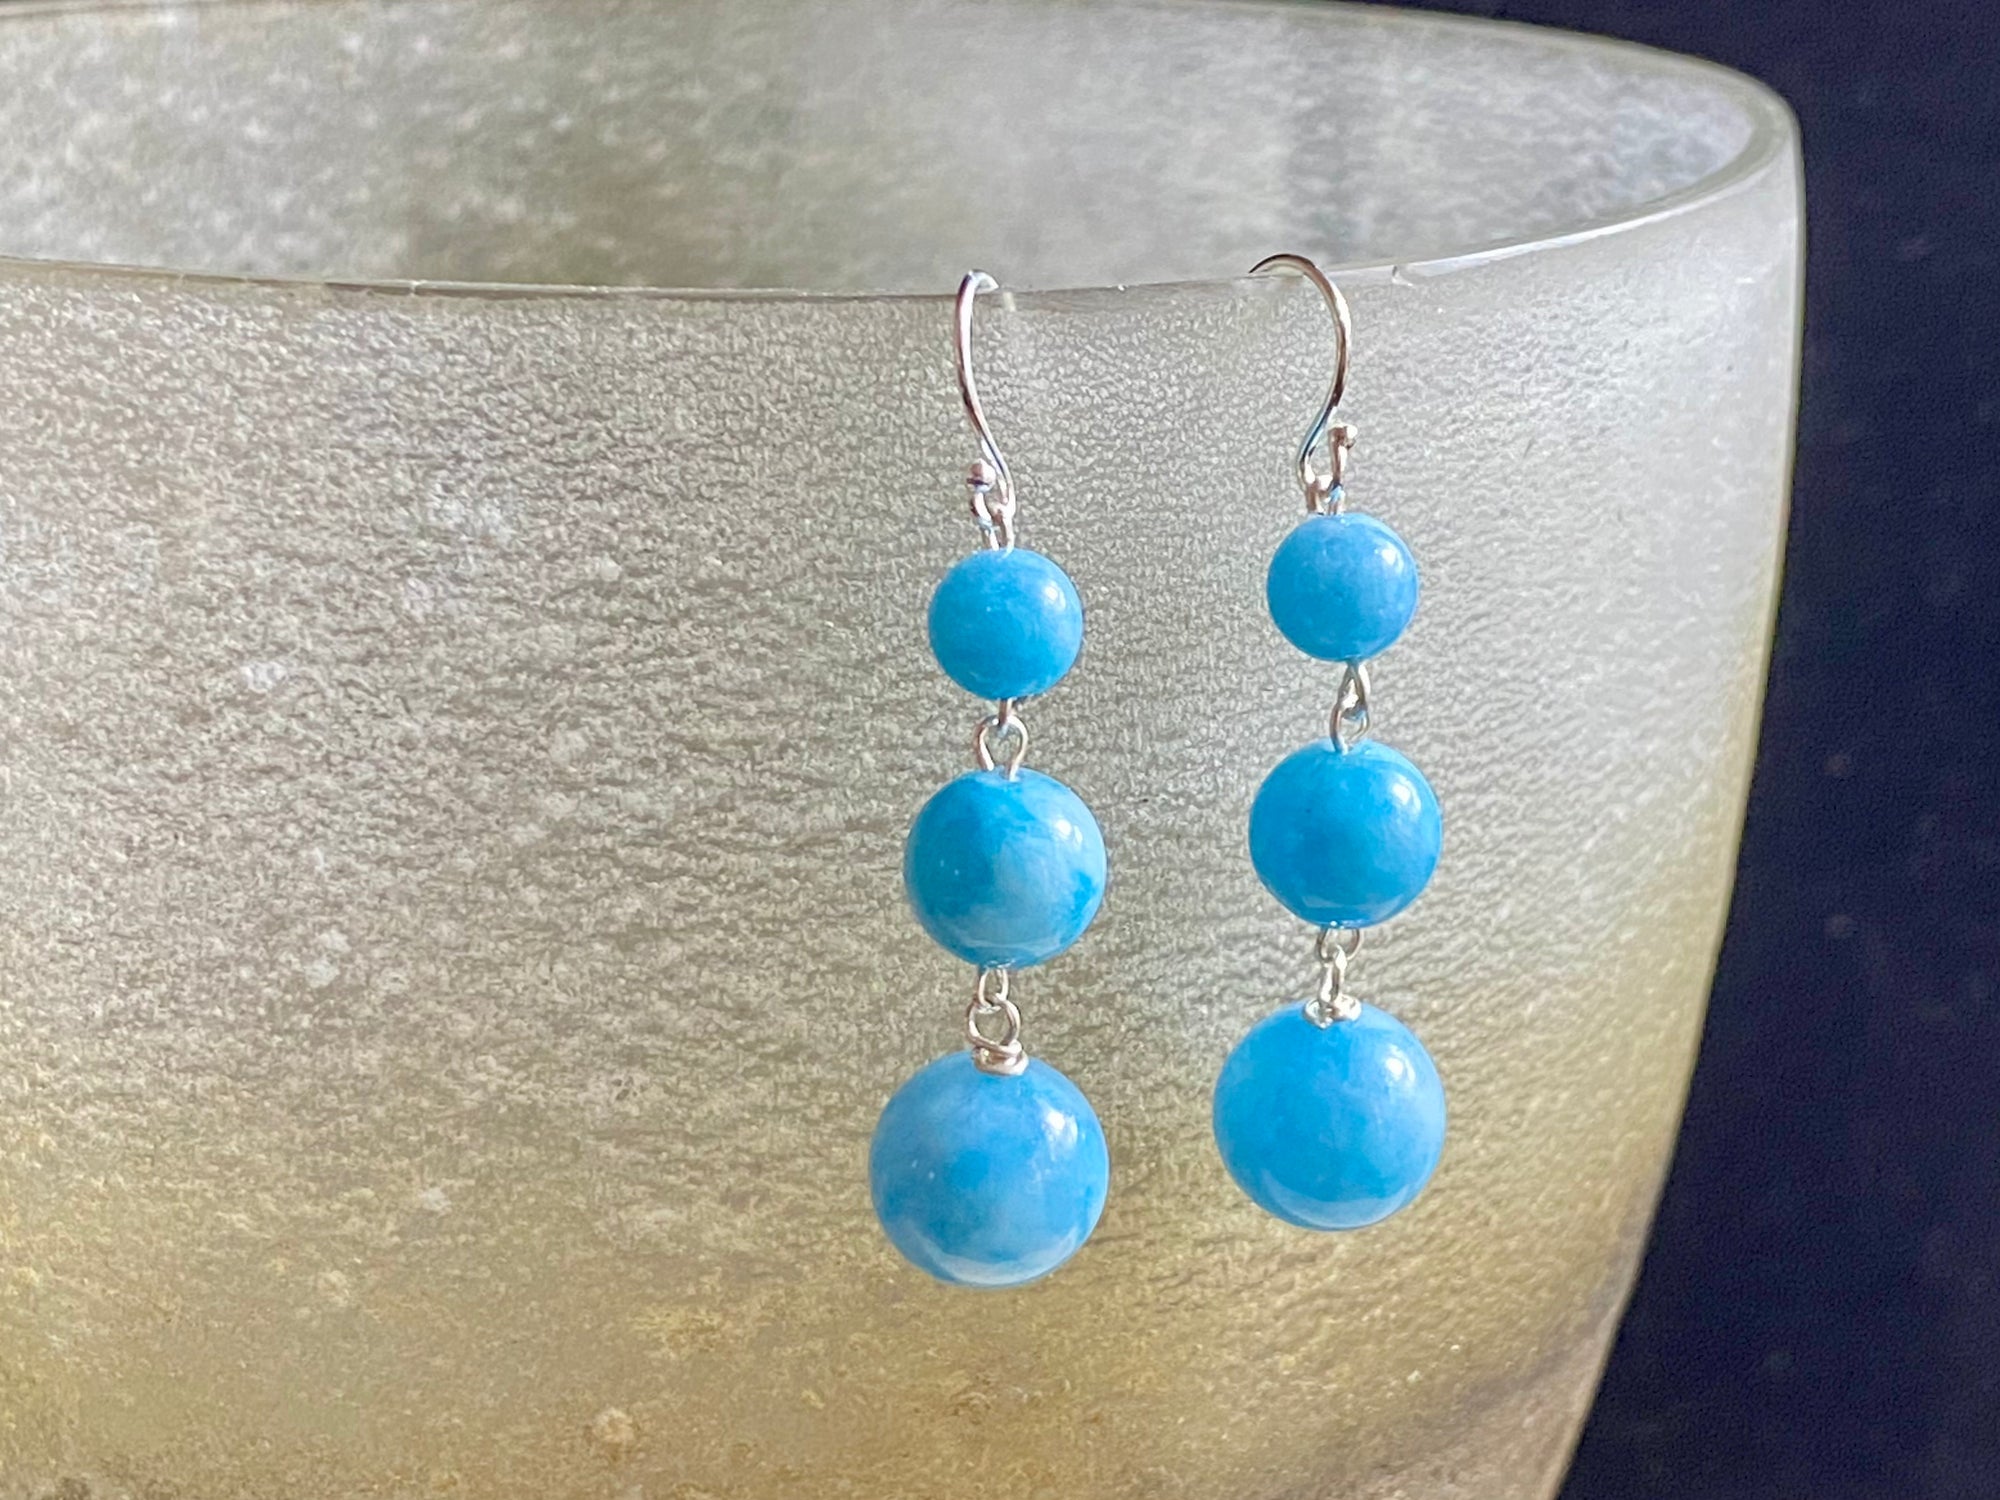 Simple three drop blue chalcedony earrings finished in sterling silver with sterling silver hooks. Elegant and simple earrings and one of most popular designs. Measurements: 4.7 cm (1.75") length including hook